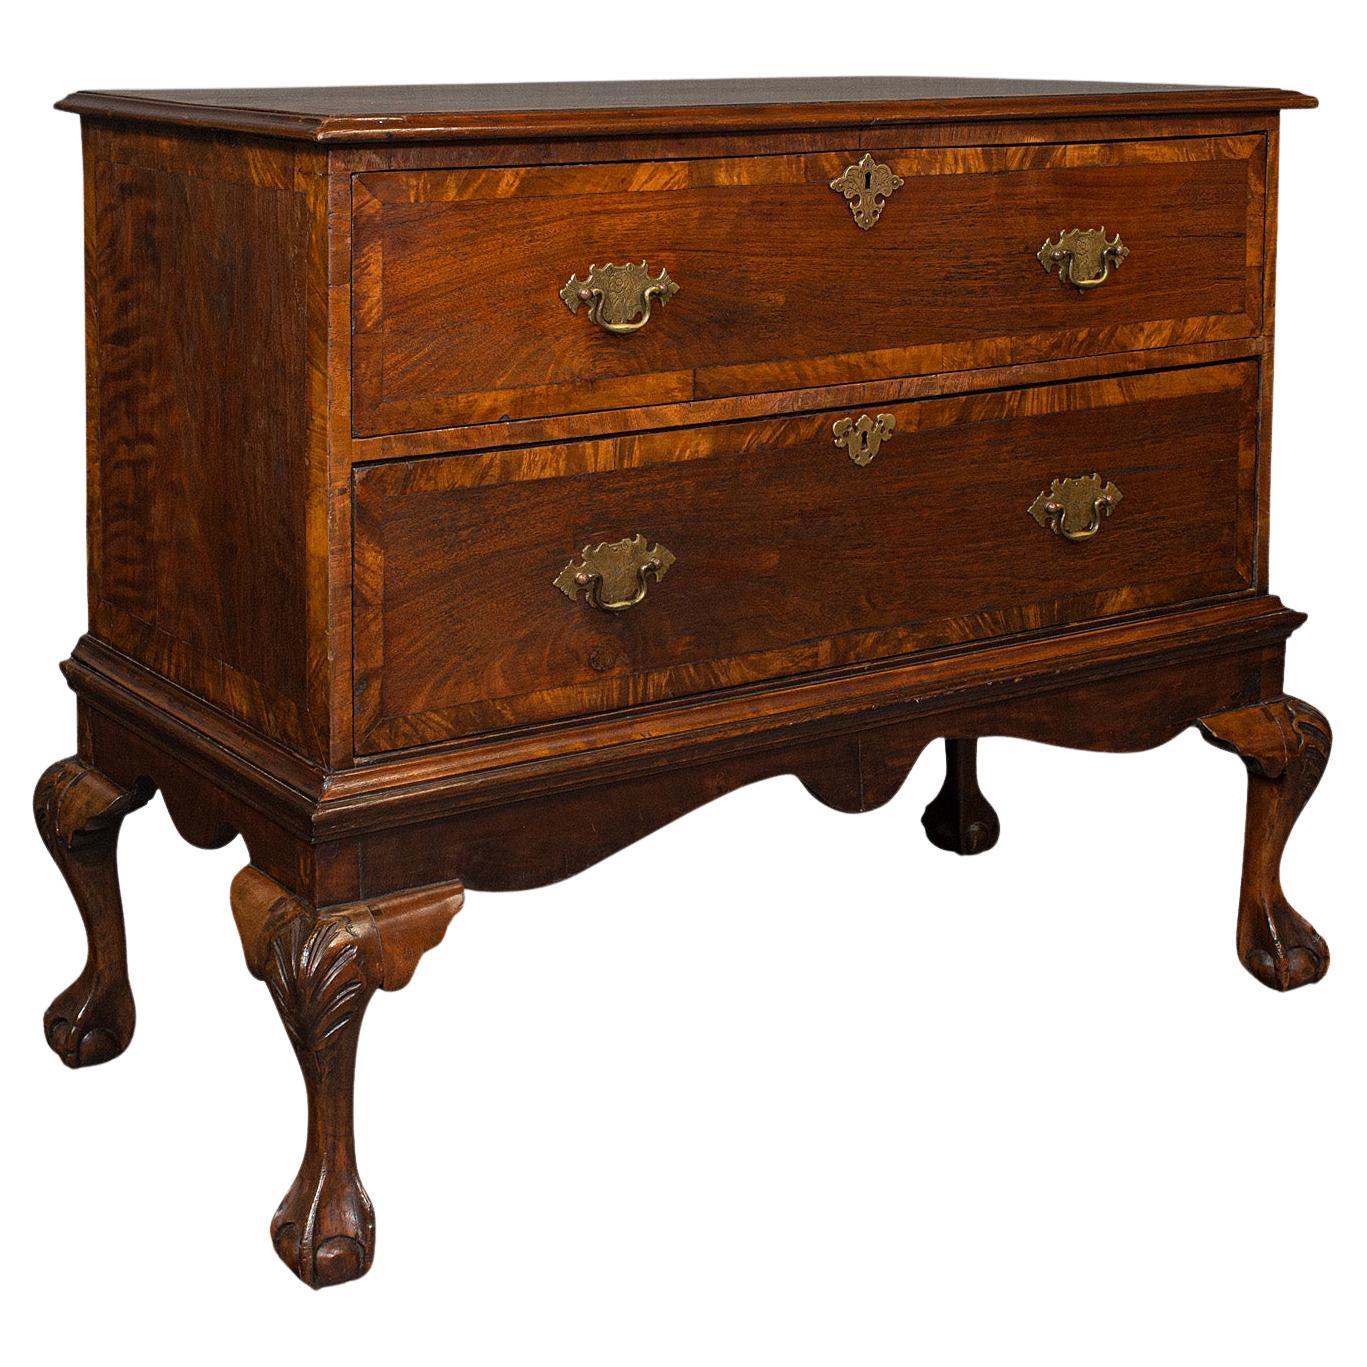 Antique Chest on Stand, English, Lowboy, Chest of Drawers, Victorian, Circa 1870